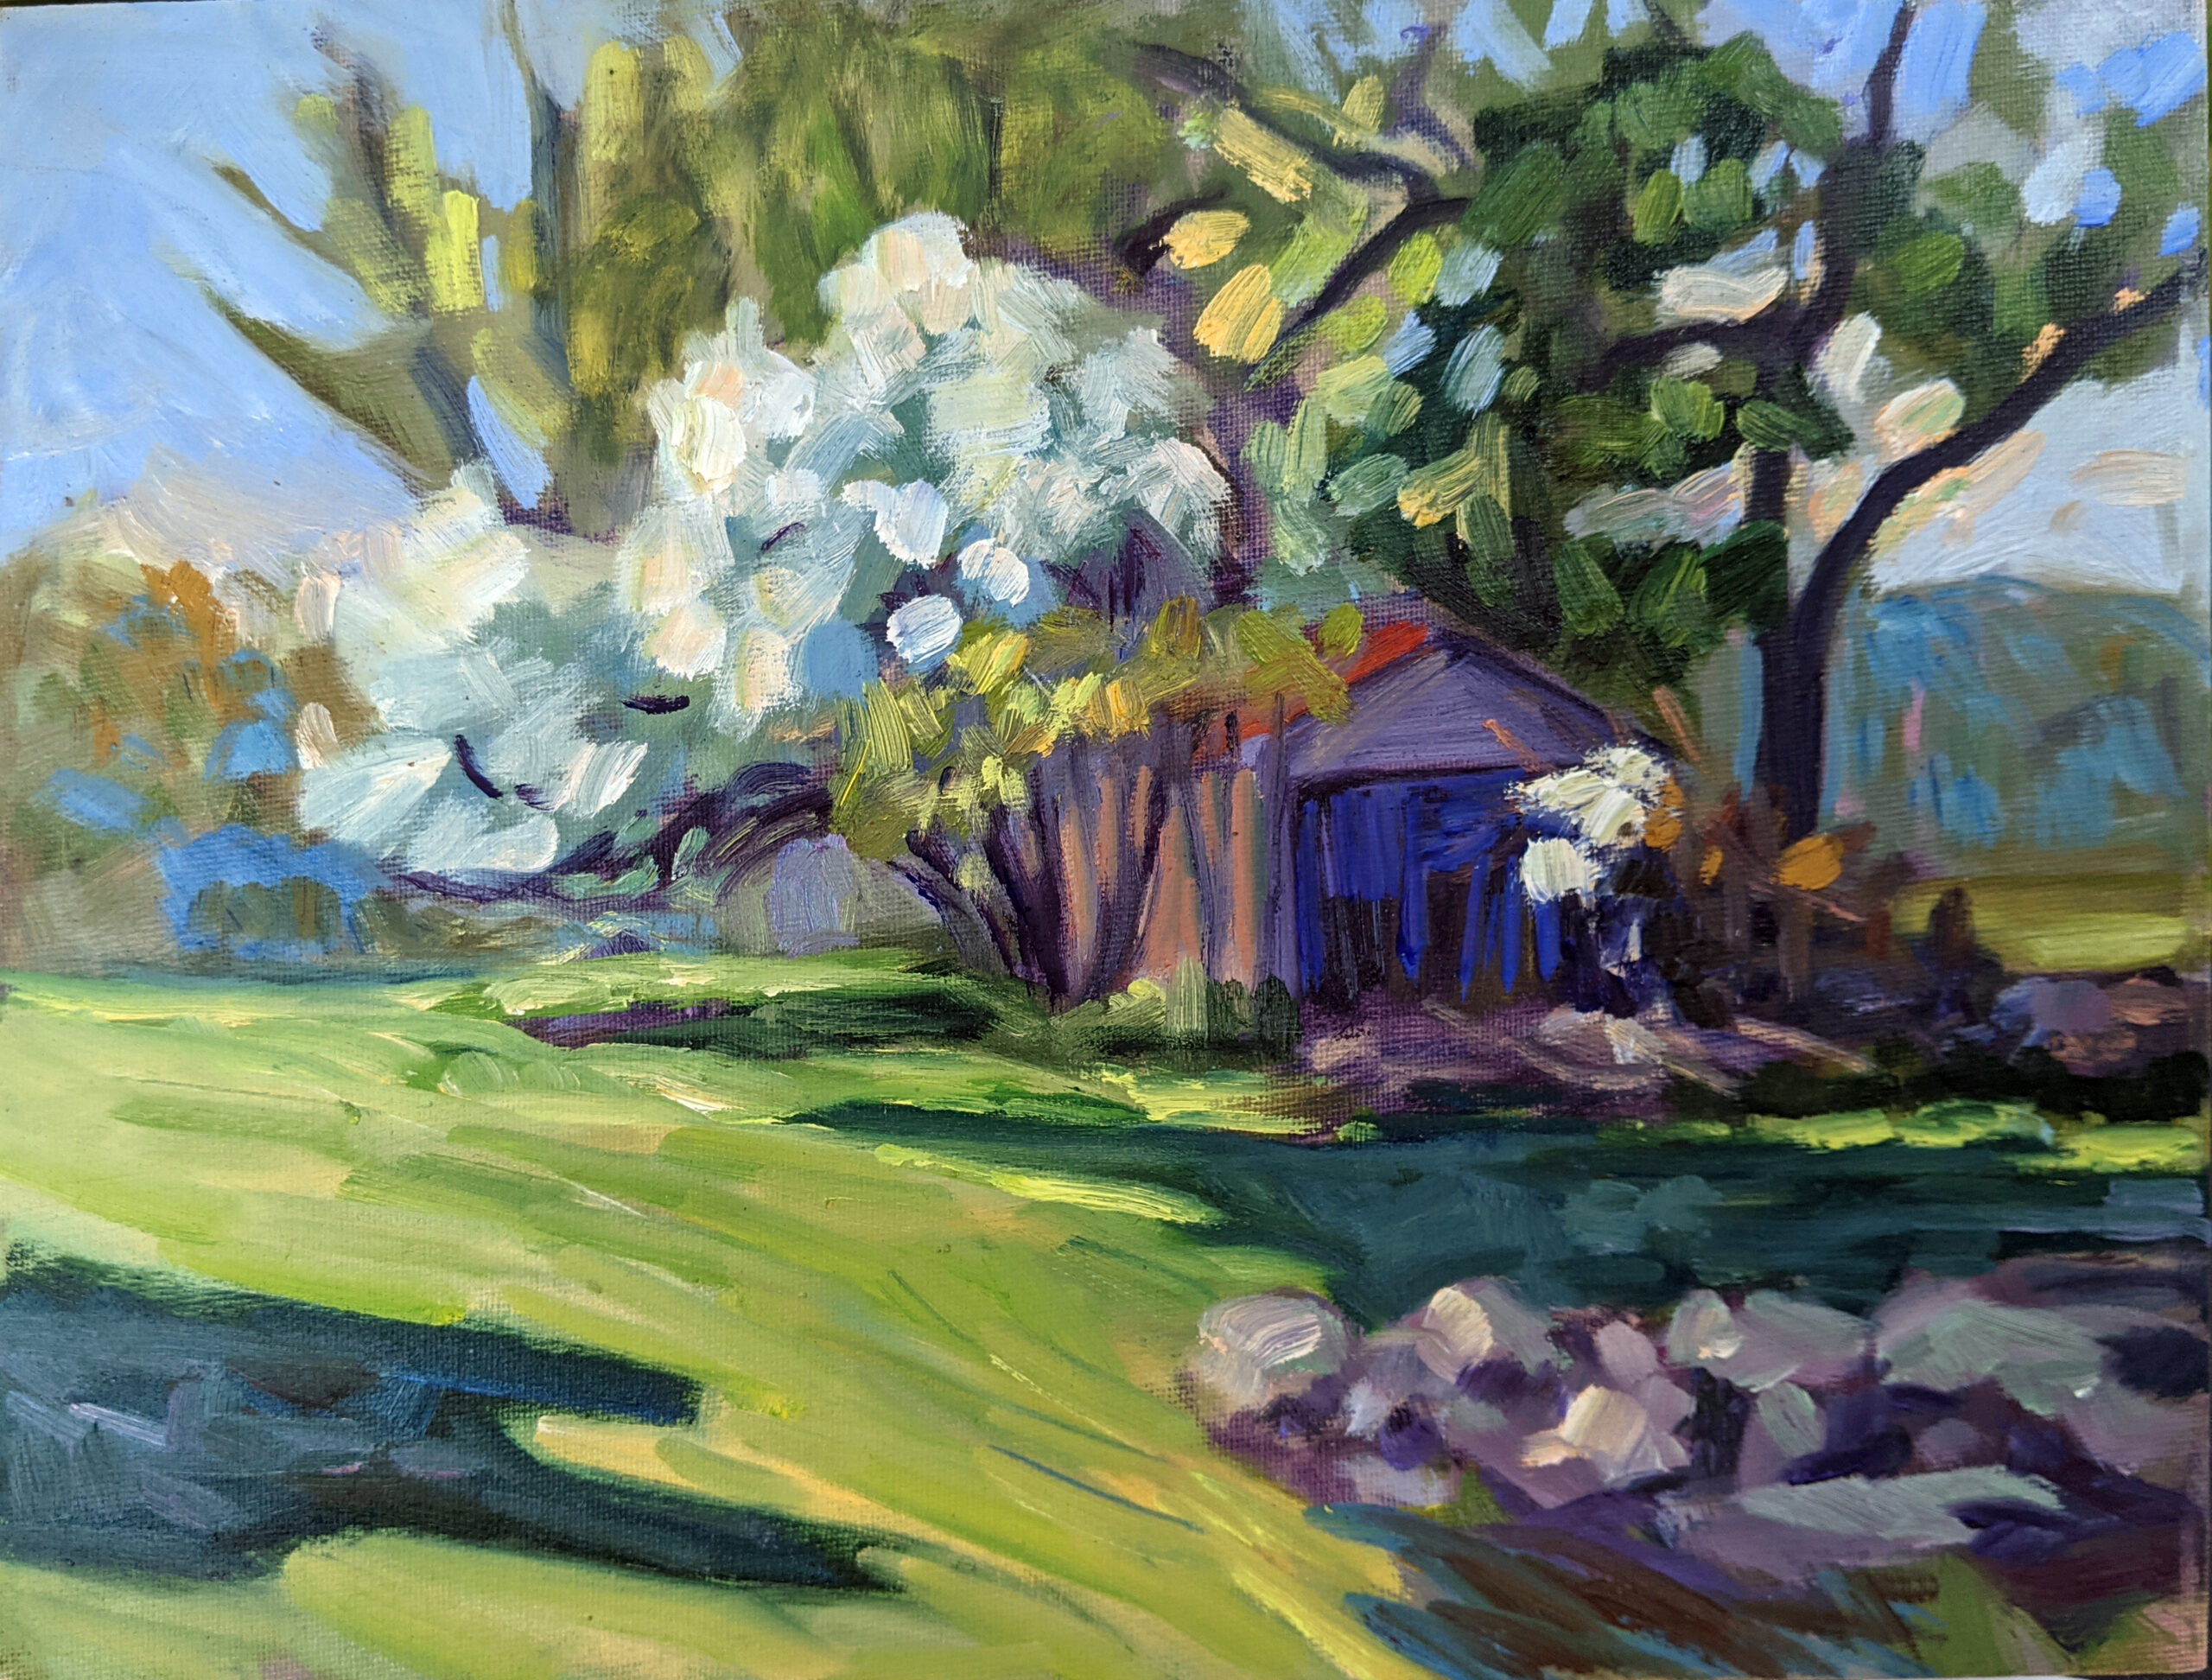 Apple Blossom Time, oil on archival canvasboard, $869 framed includes shipping and handling in continental US.